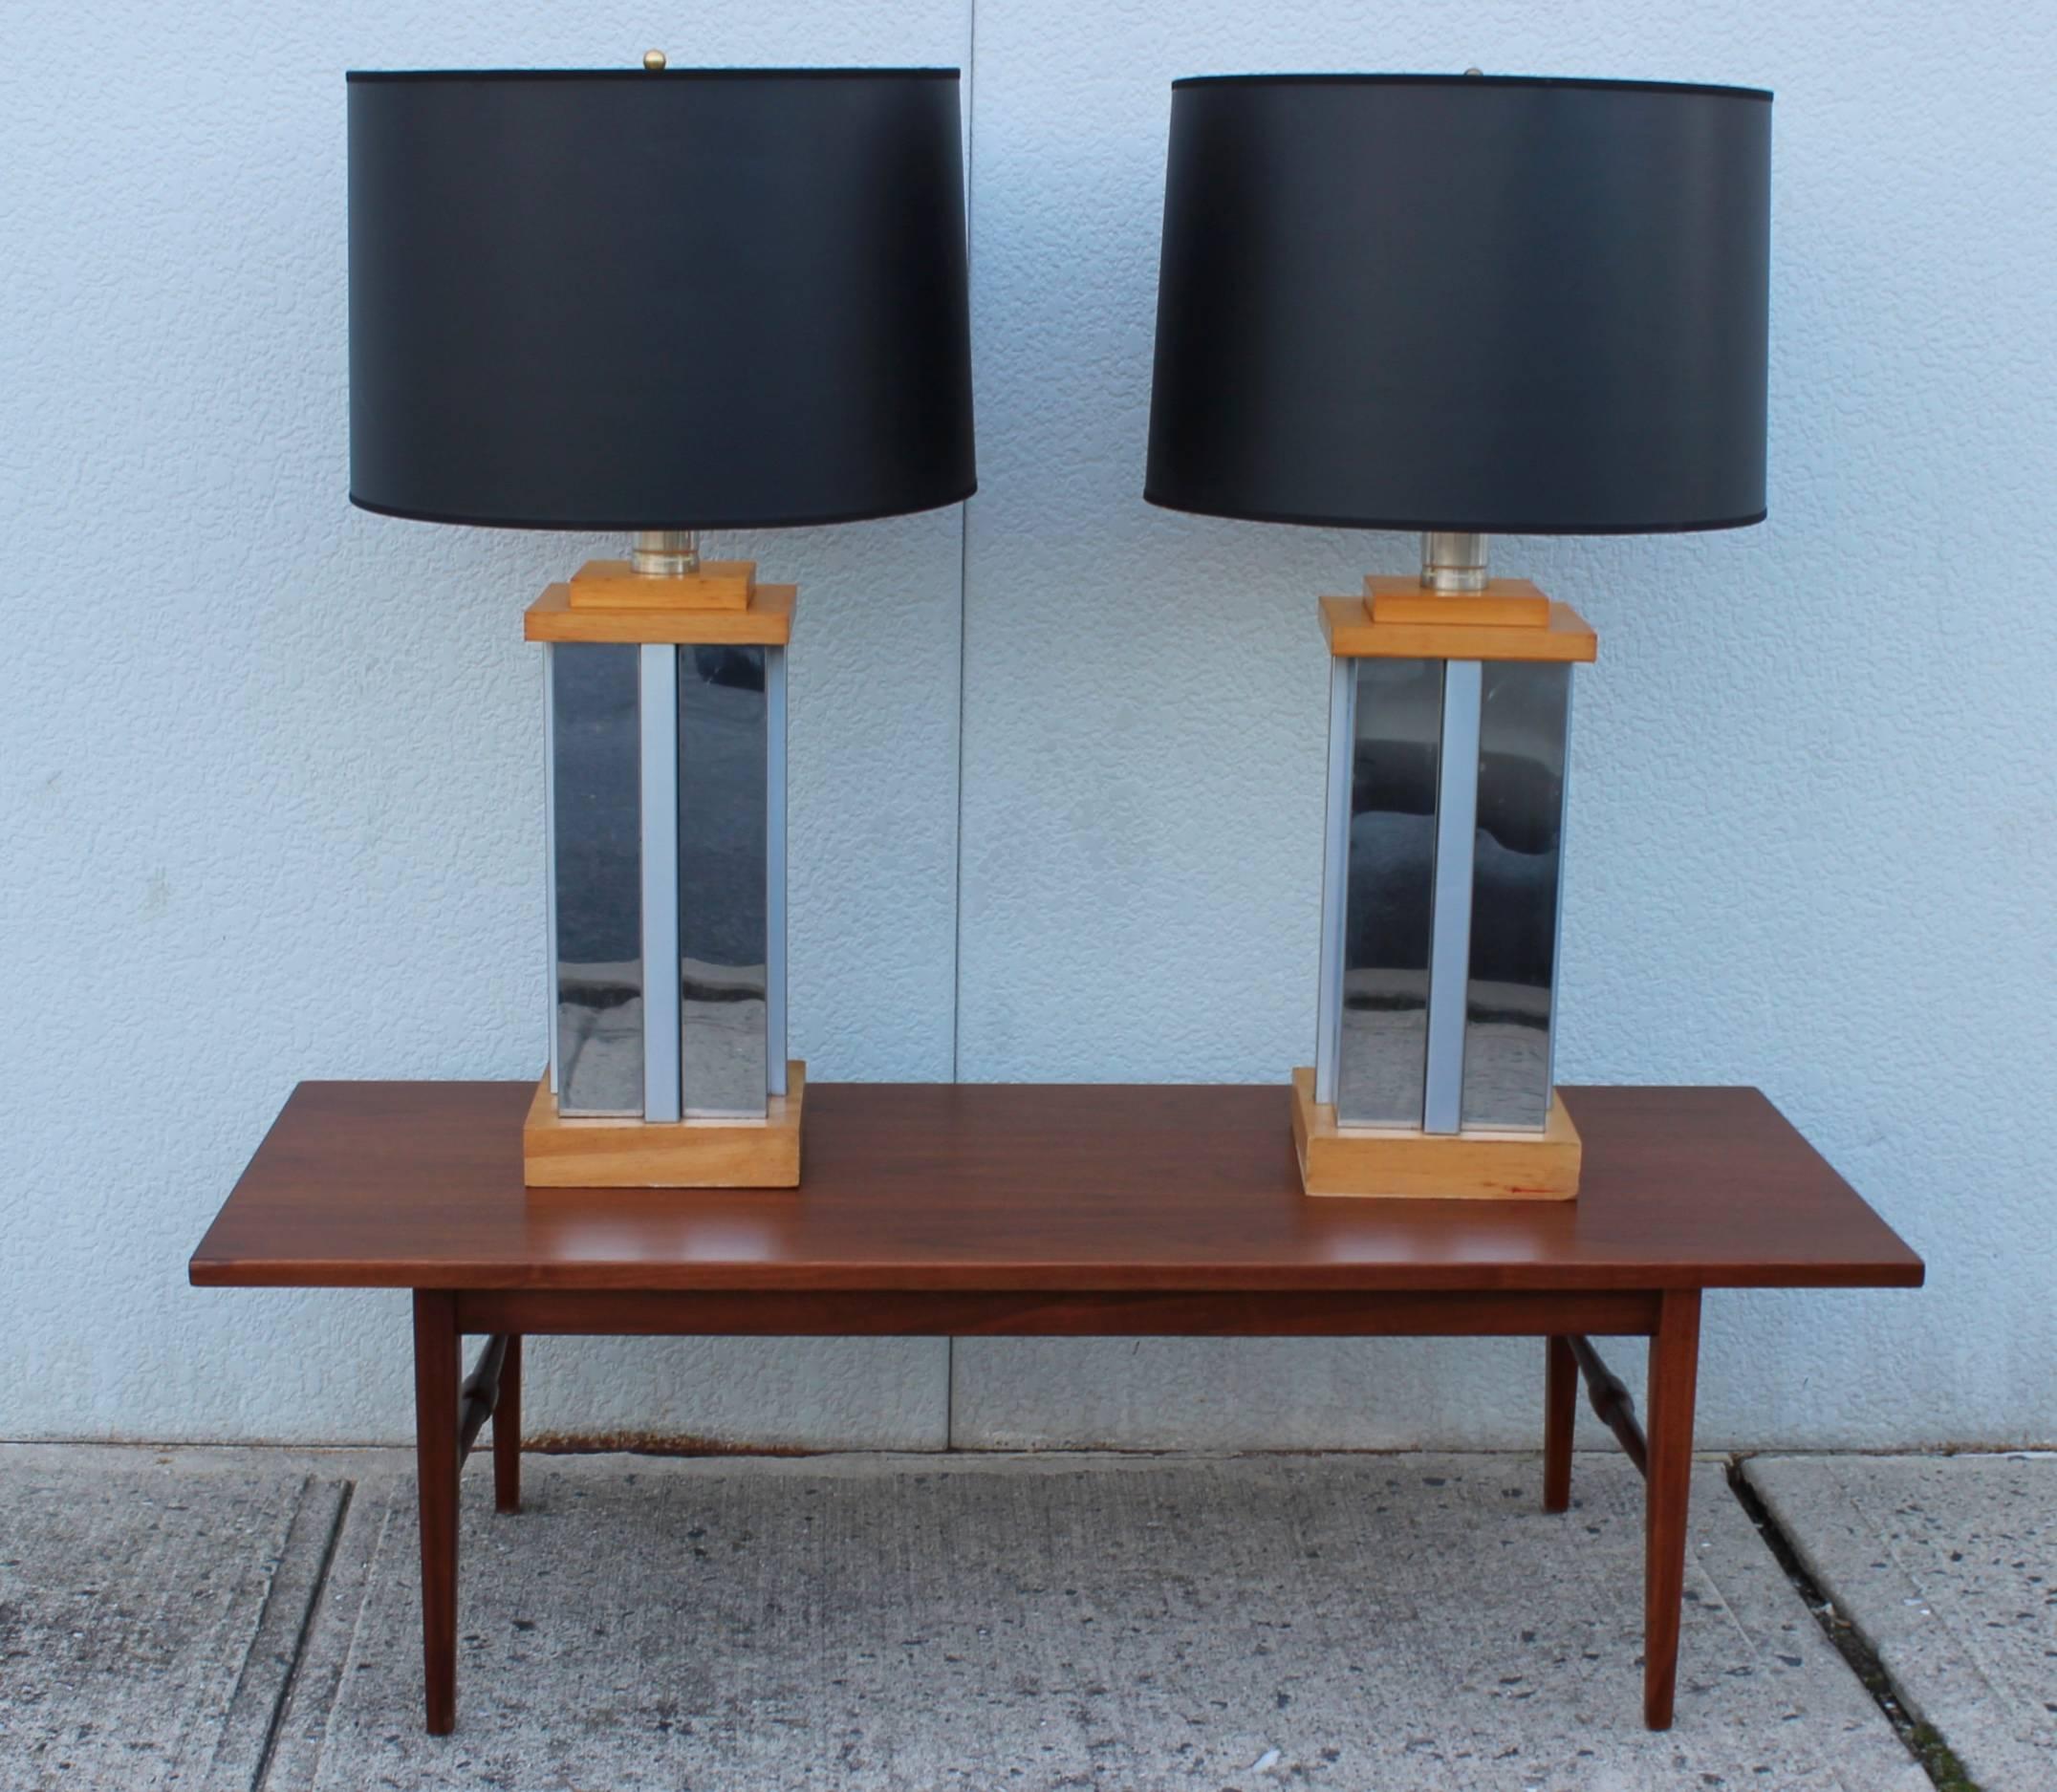 Large pair of 1970s chrome and wood table lamps, in the style of Curtis Jere.

Shades for photography only.

Measures: Height to light socket 24''.